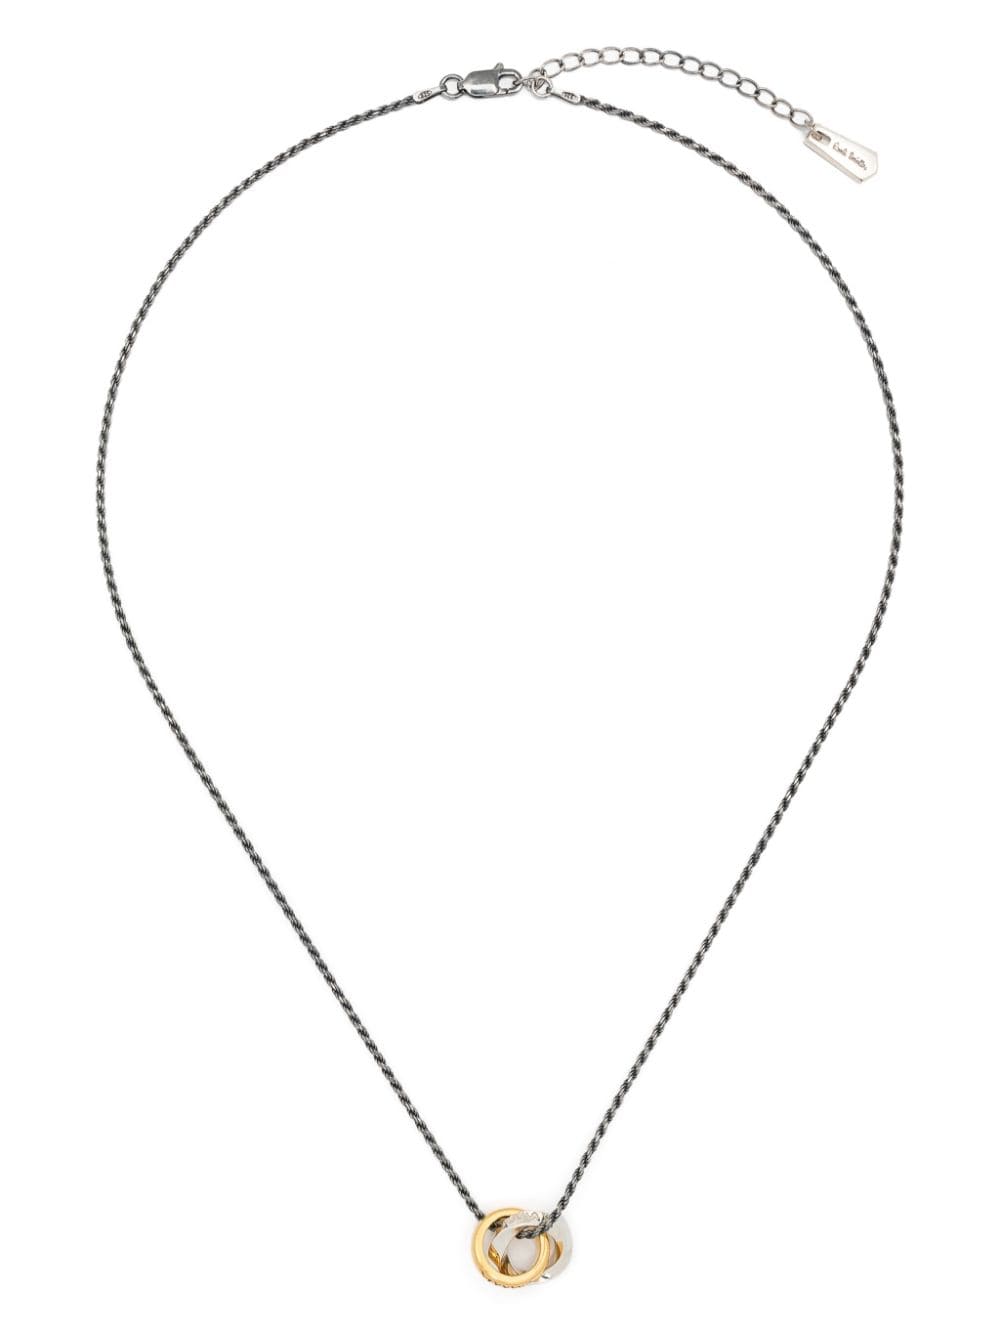 Paul Smith Double Ring pendant necklace - Silver von Paul Smith